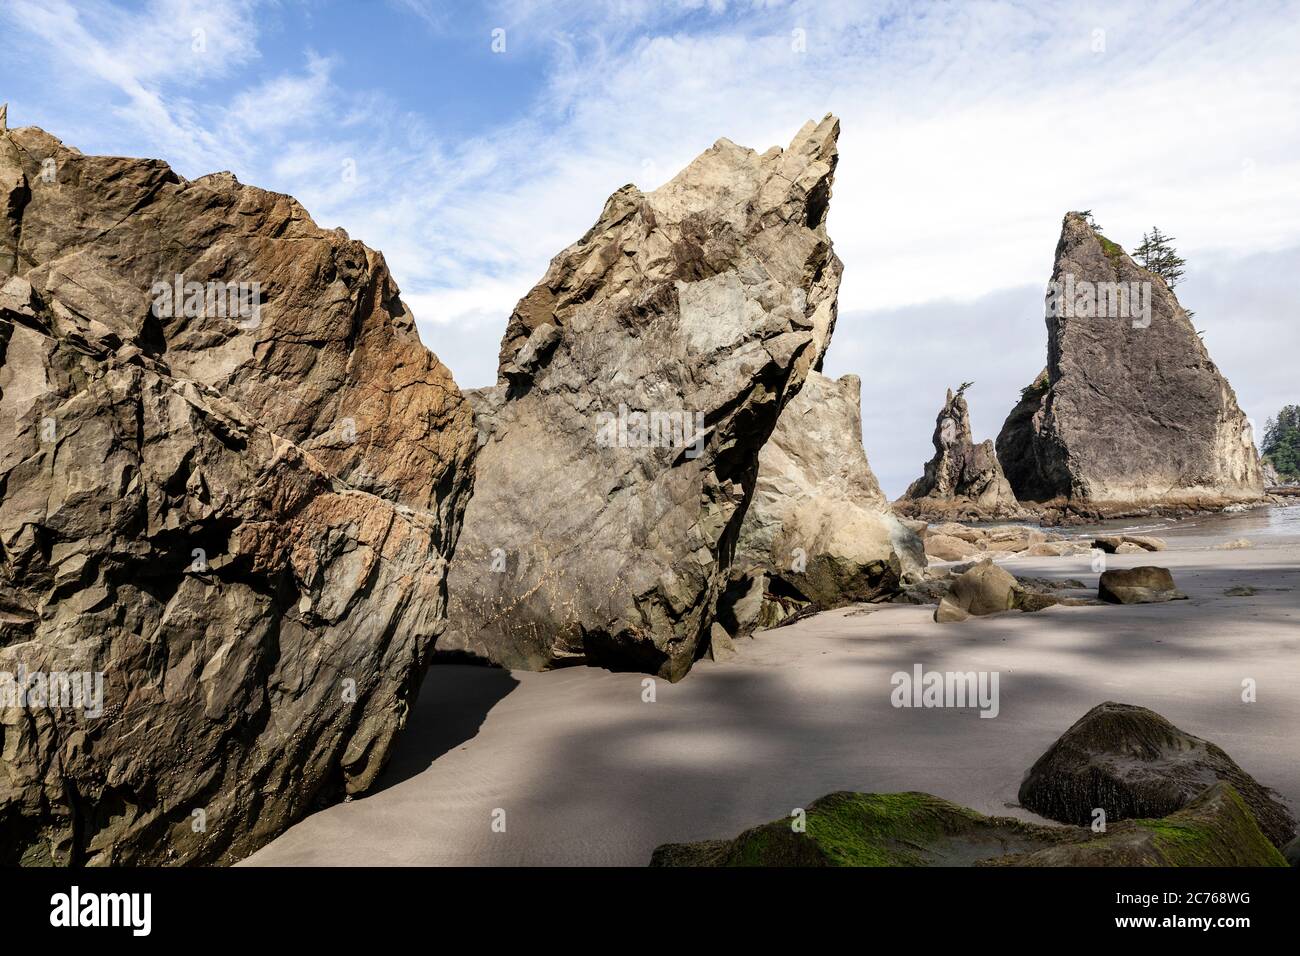 WA17481-00...WASHINGTON - Rocky coast line near Hole-in-the-wall at the north end of Rialto Beach in Olympic National Park. Stock Photo